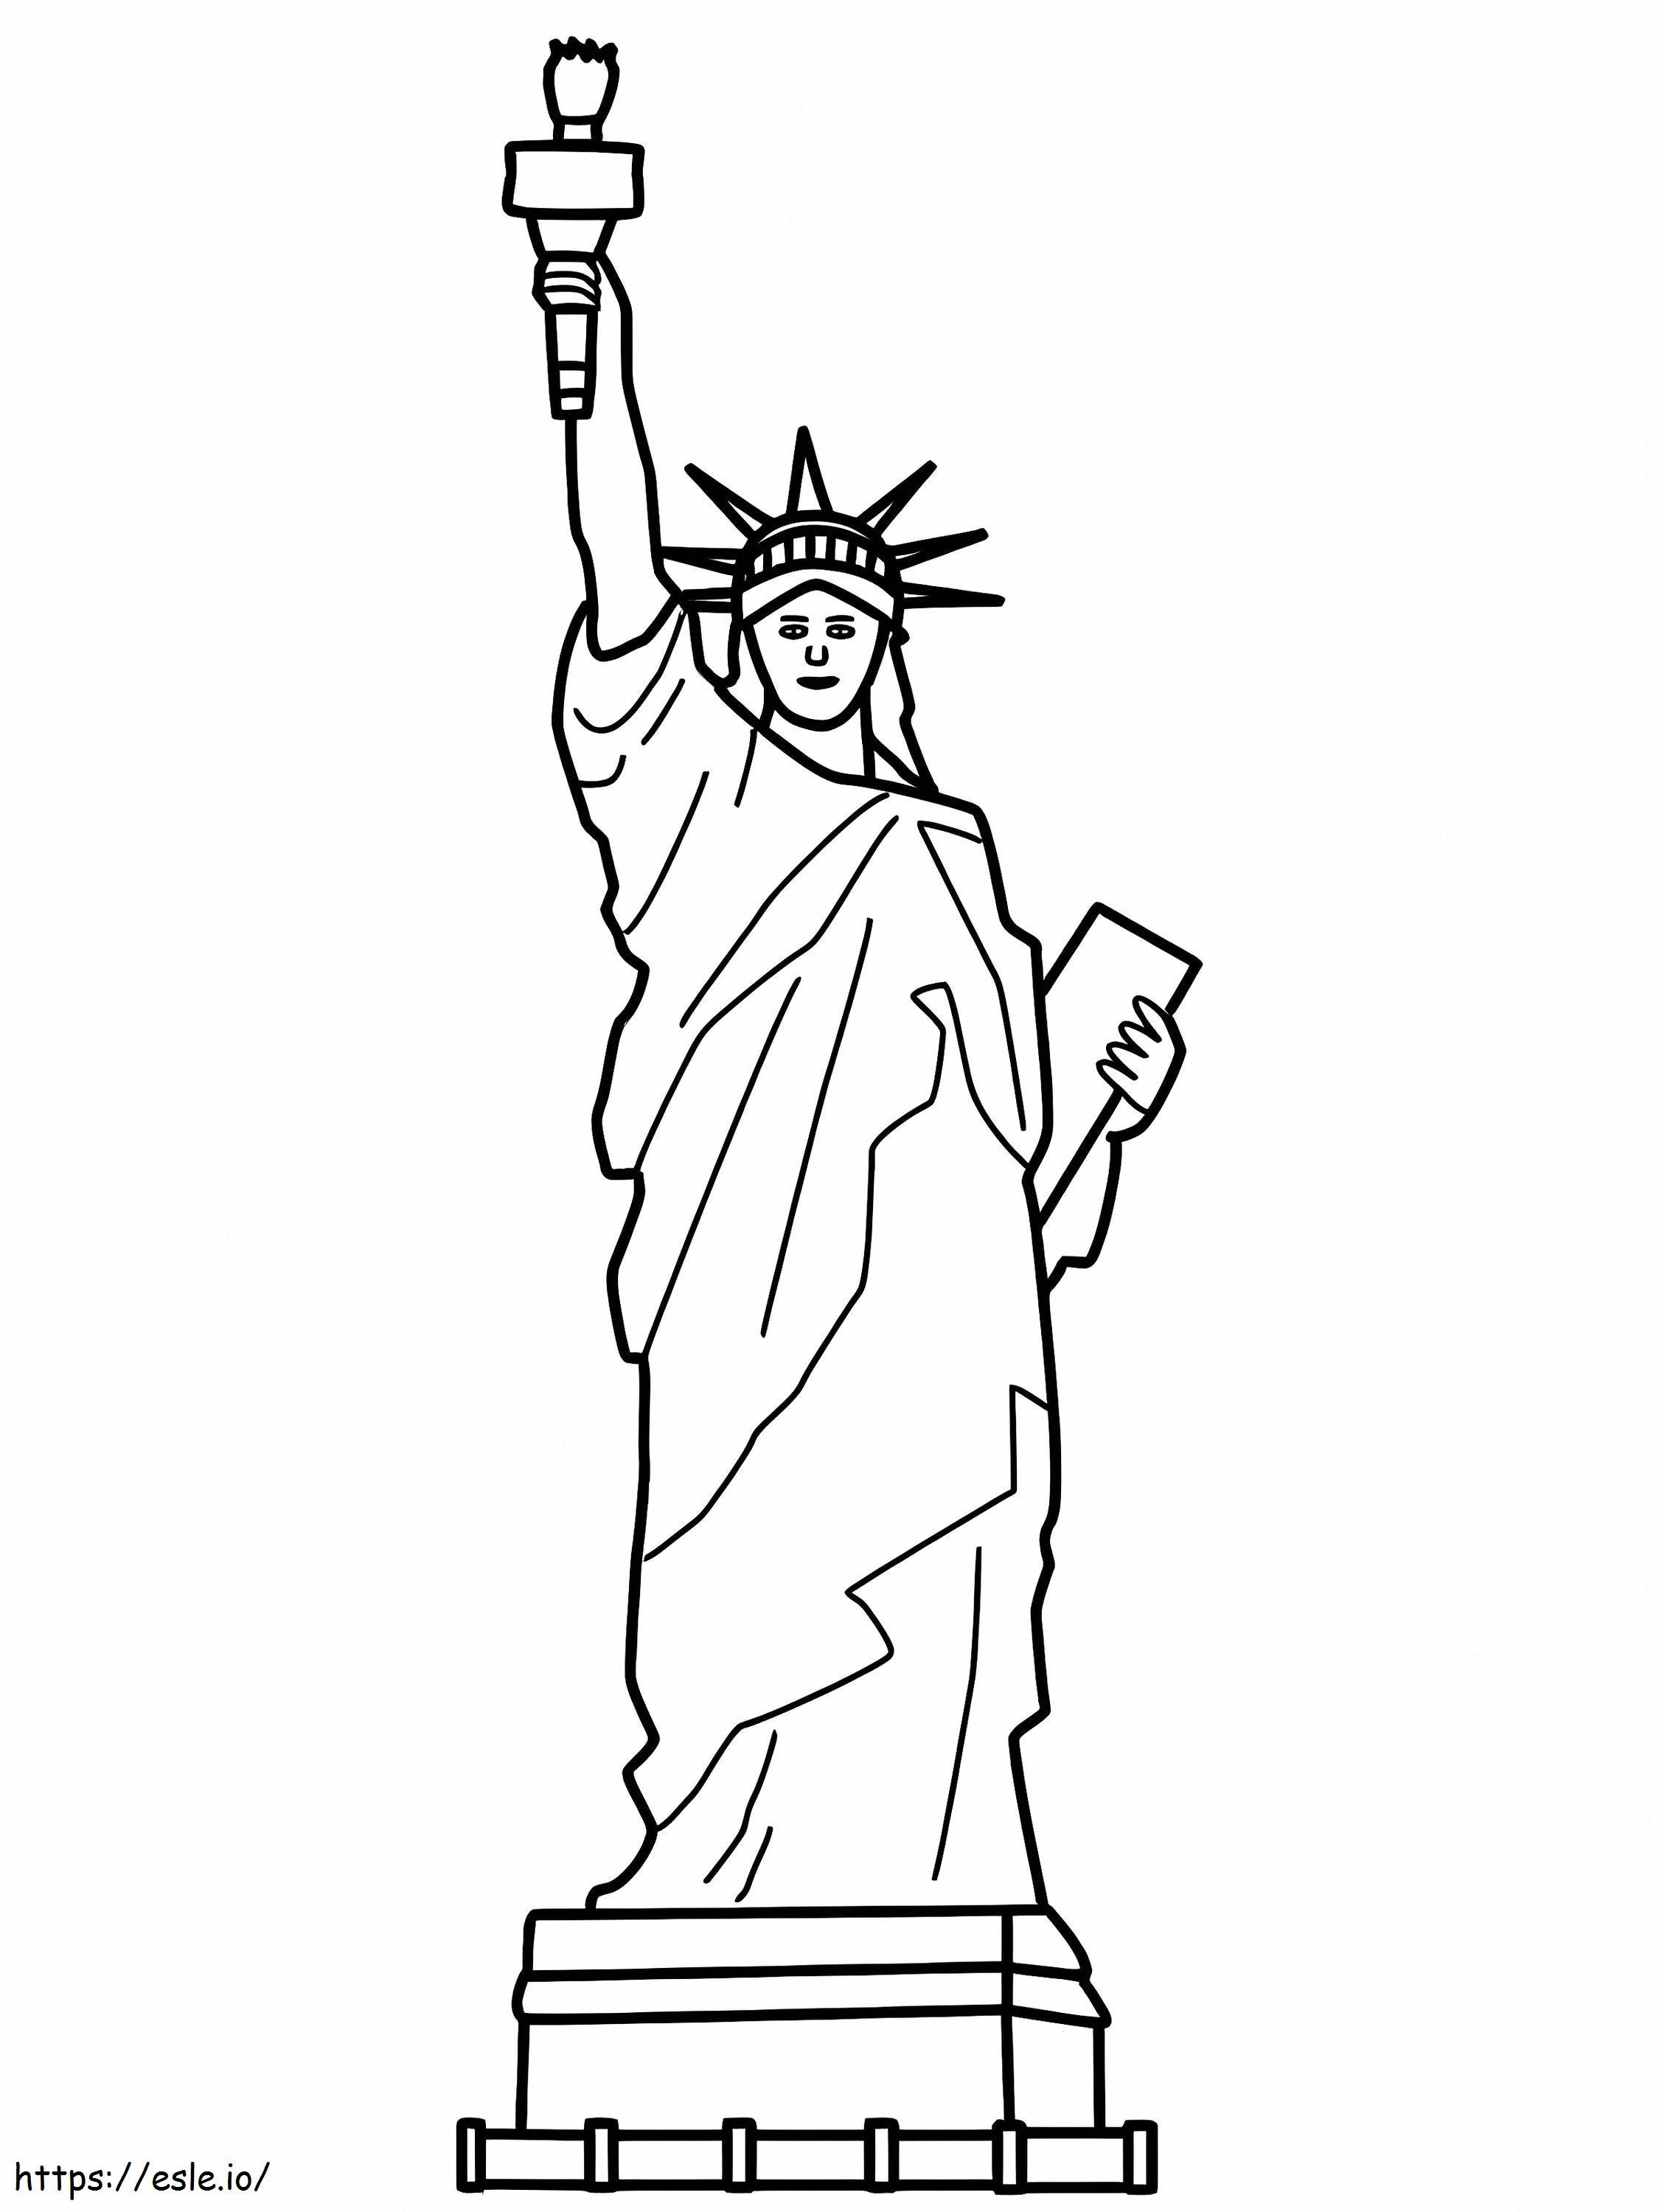 Basic Statue Of Liberty coloring page